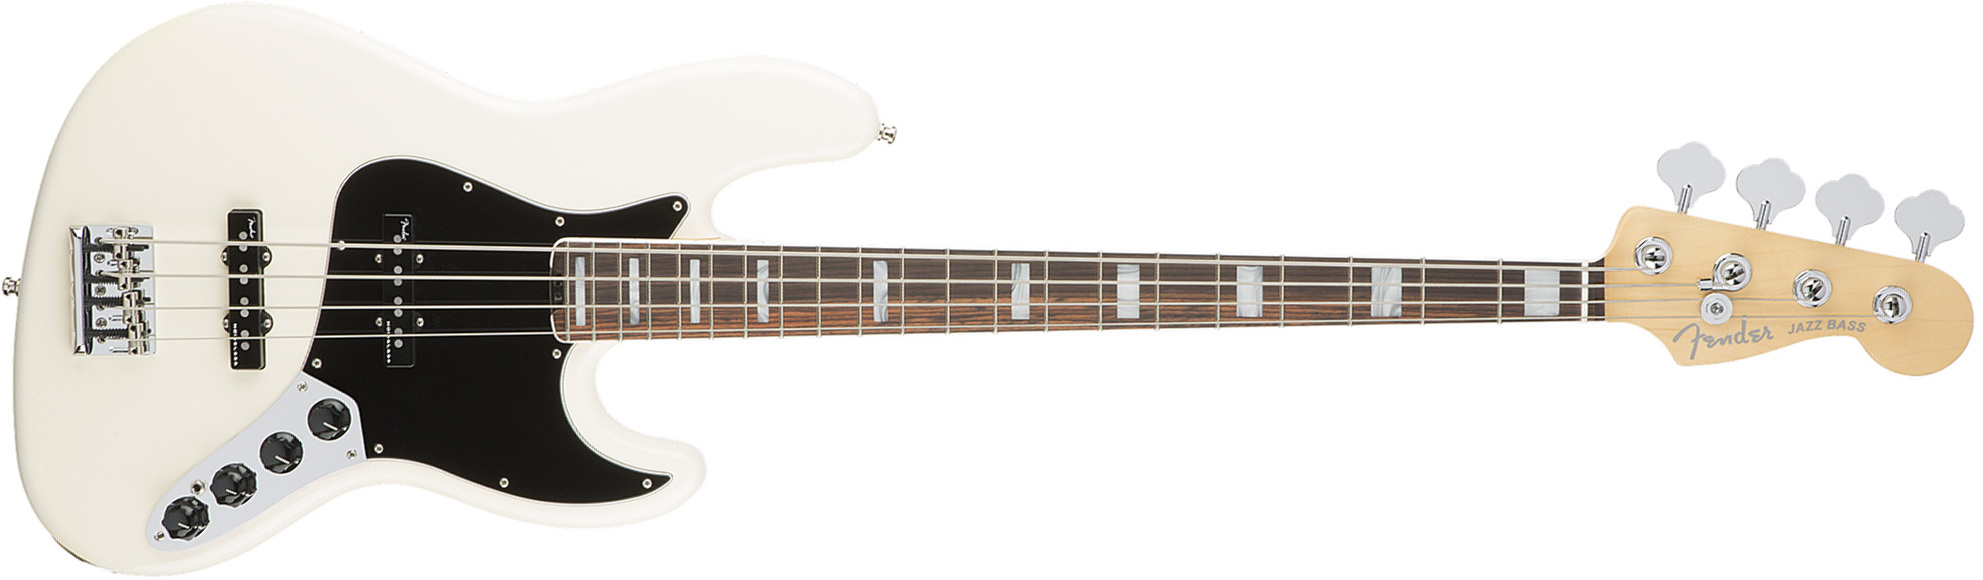 Fender Jazz Bass American Elite 2016 Usa Rw - Olympic White - Solid body electric bass - Main picture